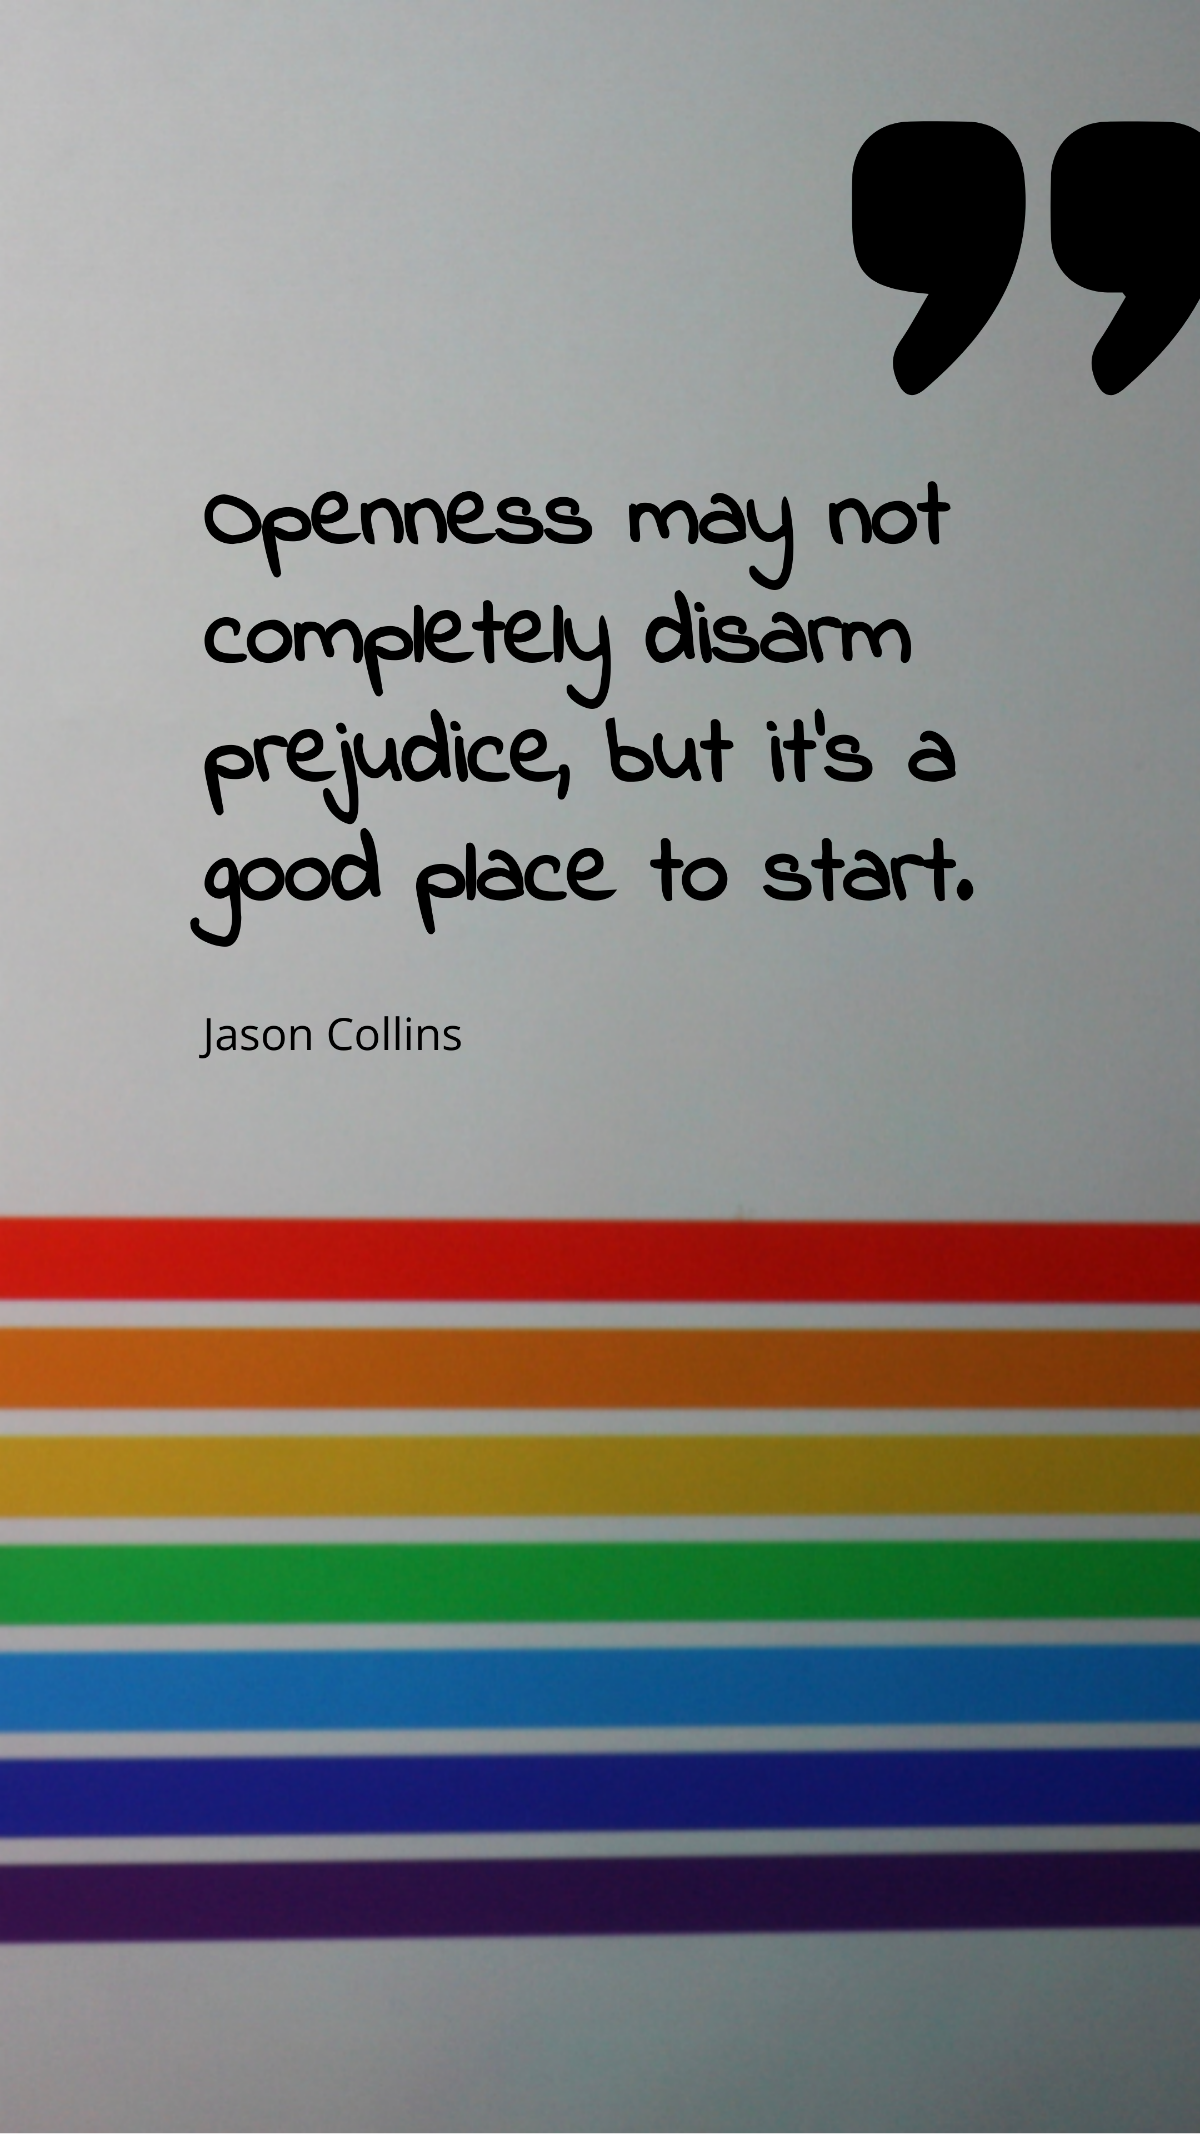 Jason Collins - Openness may not completely disarm prejudice, but it's a good place to start. Template